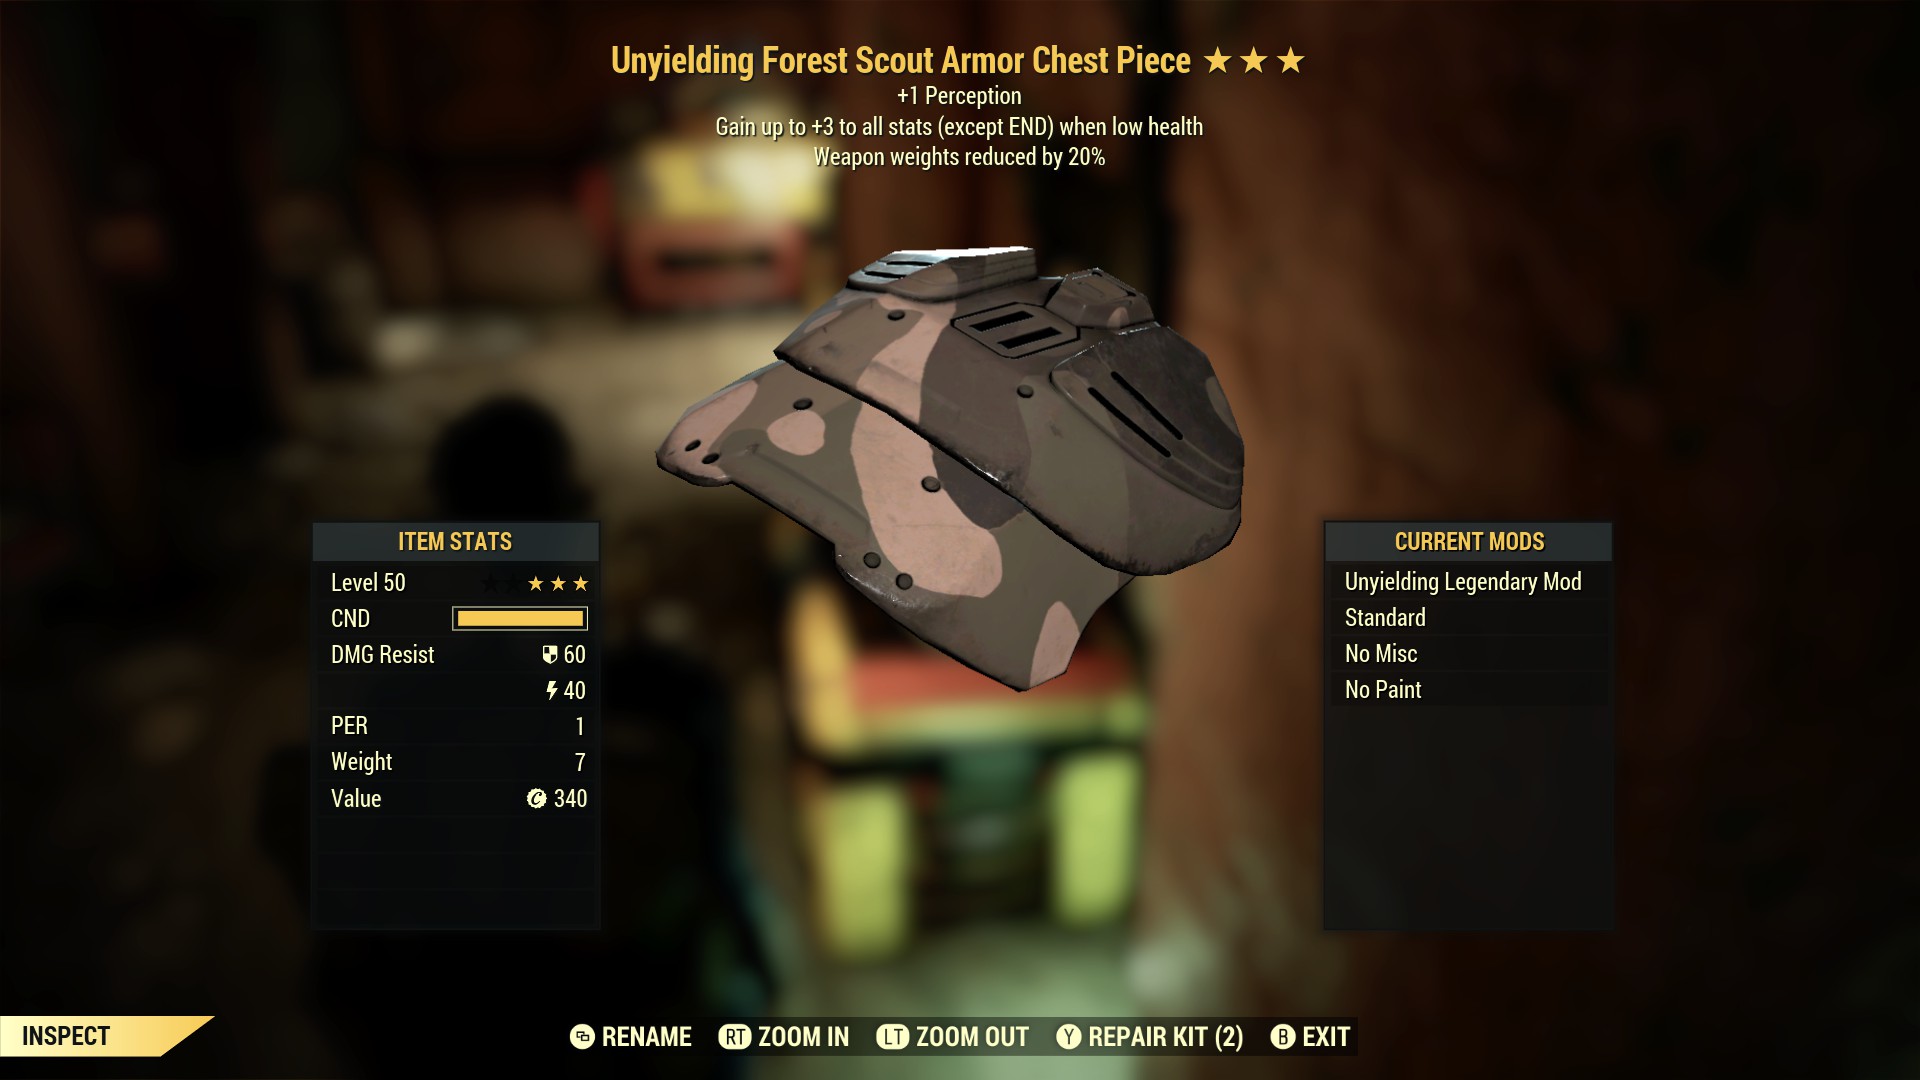 Unyielding Forest Scout Armor Chest Piece